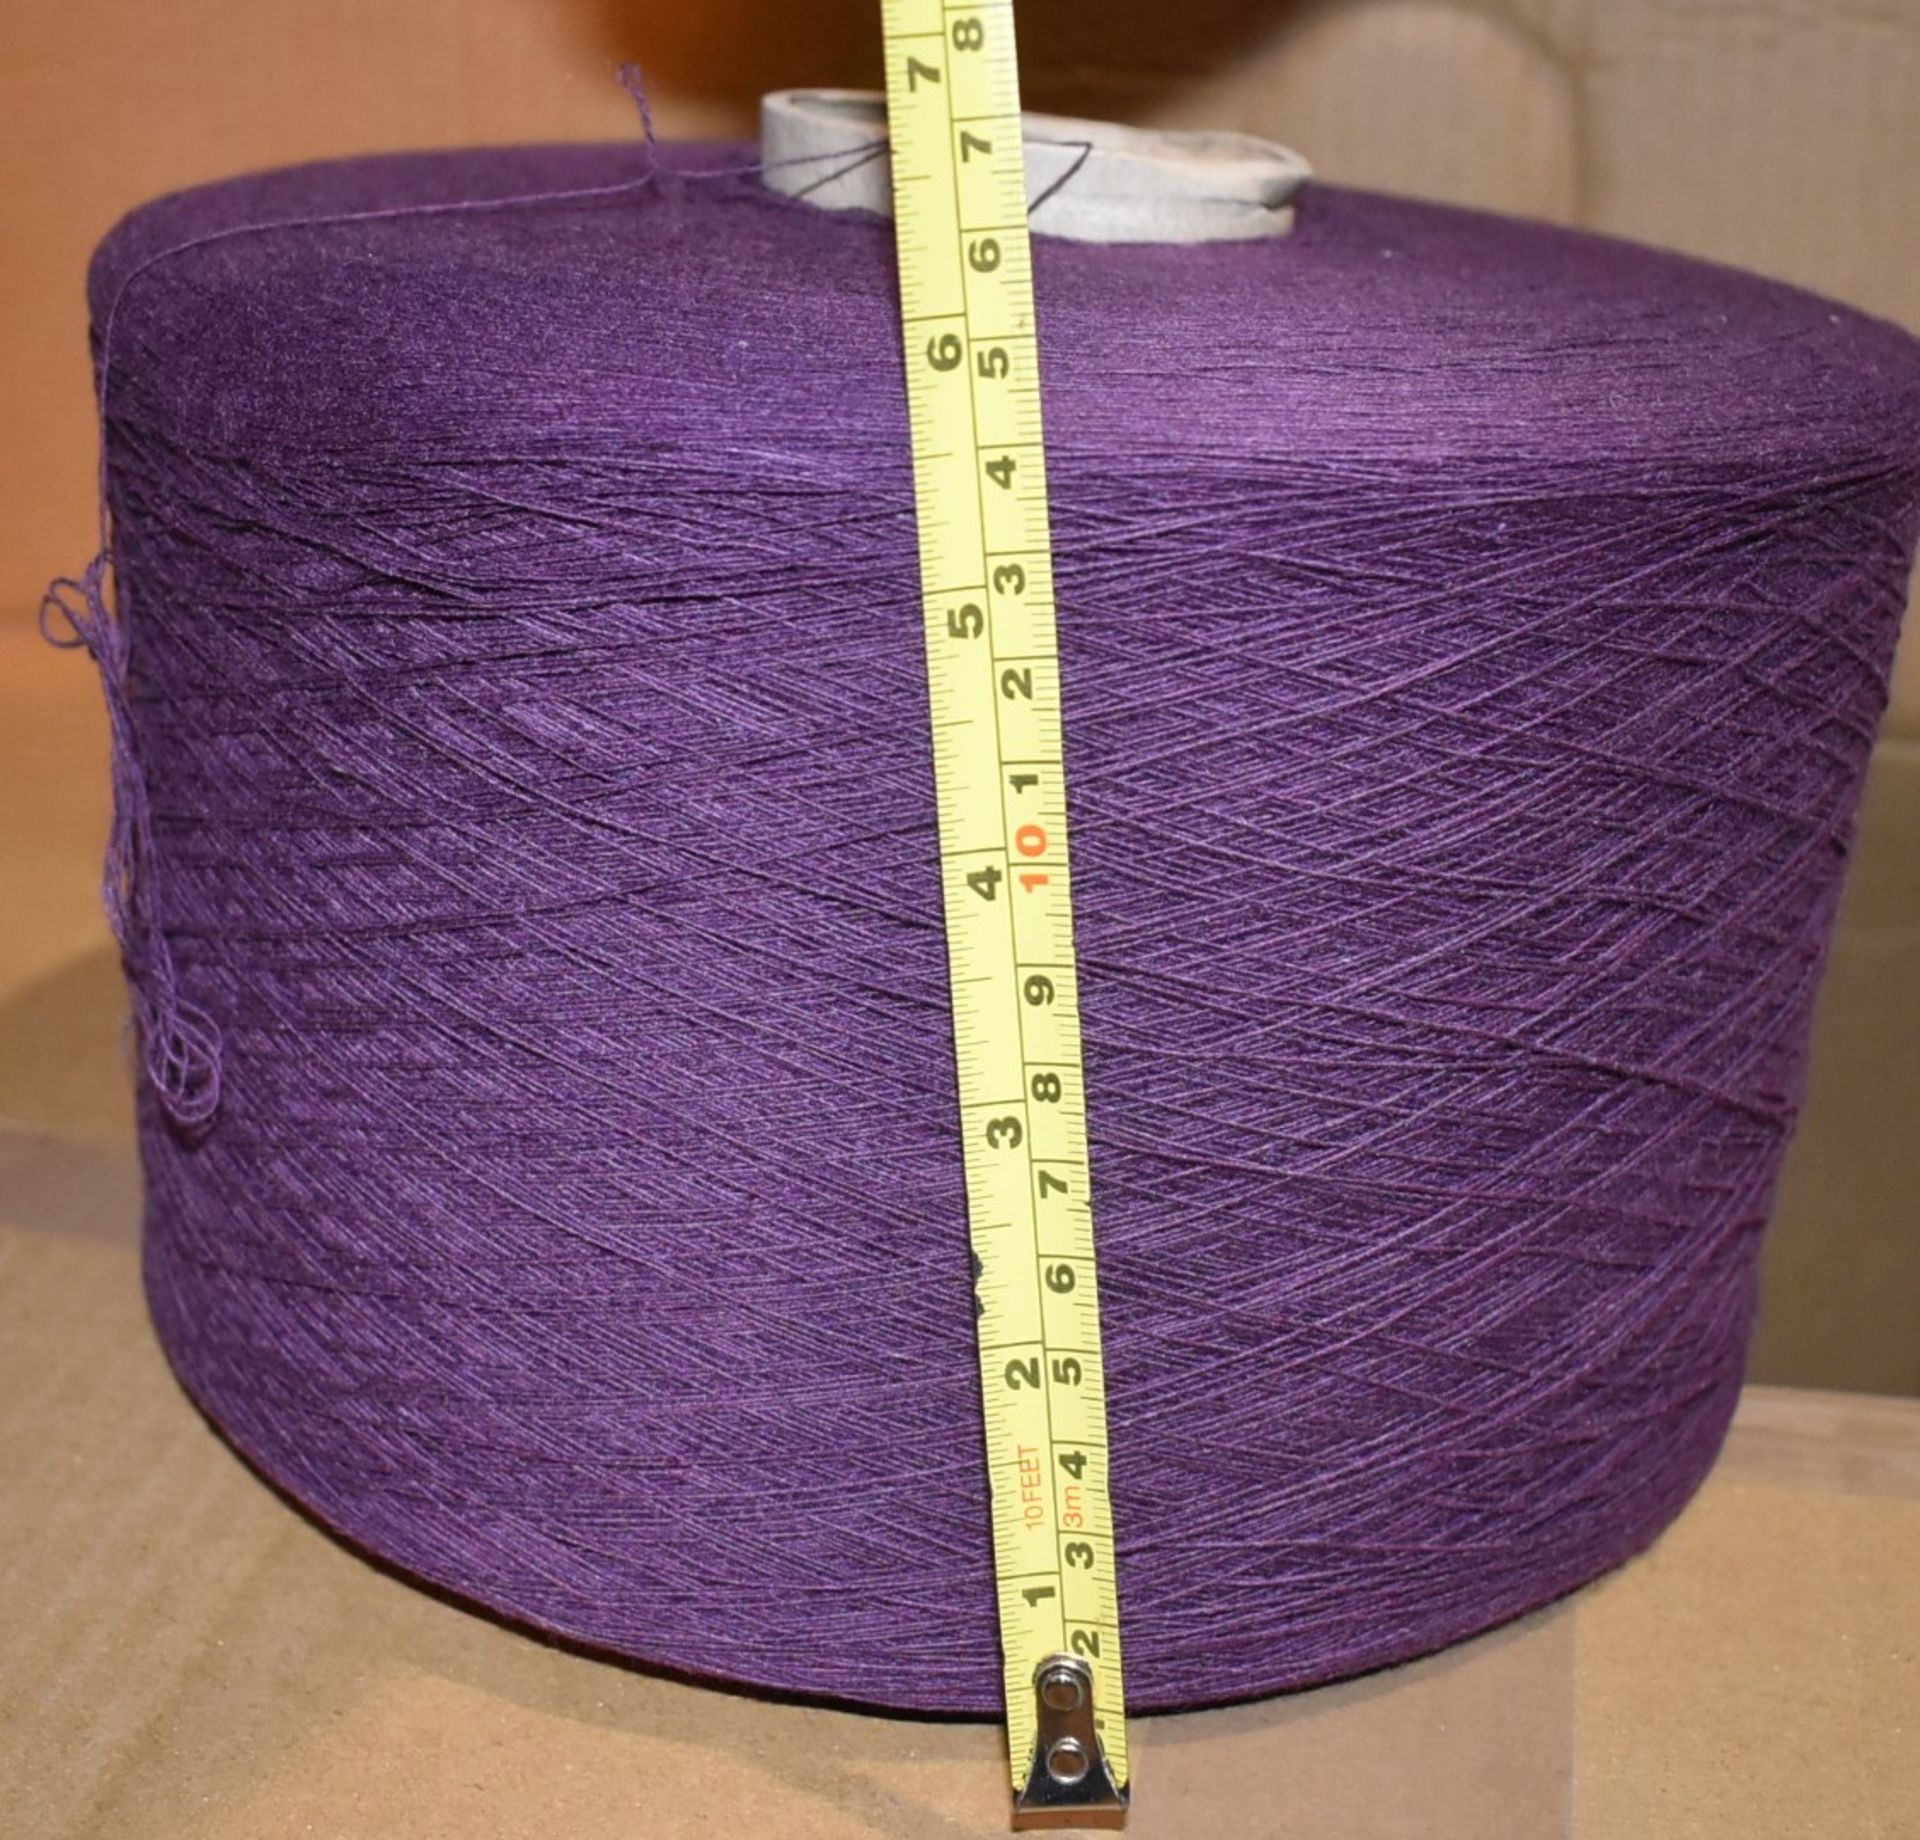 1 x Cone of 1/13 MicroCotton Knitting Yarn - Purple - Approx Weight: 2,300g - New Stock ABL Yarn - Image 12 of 13